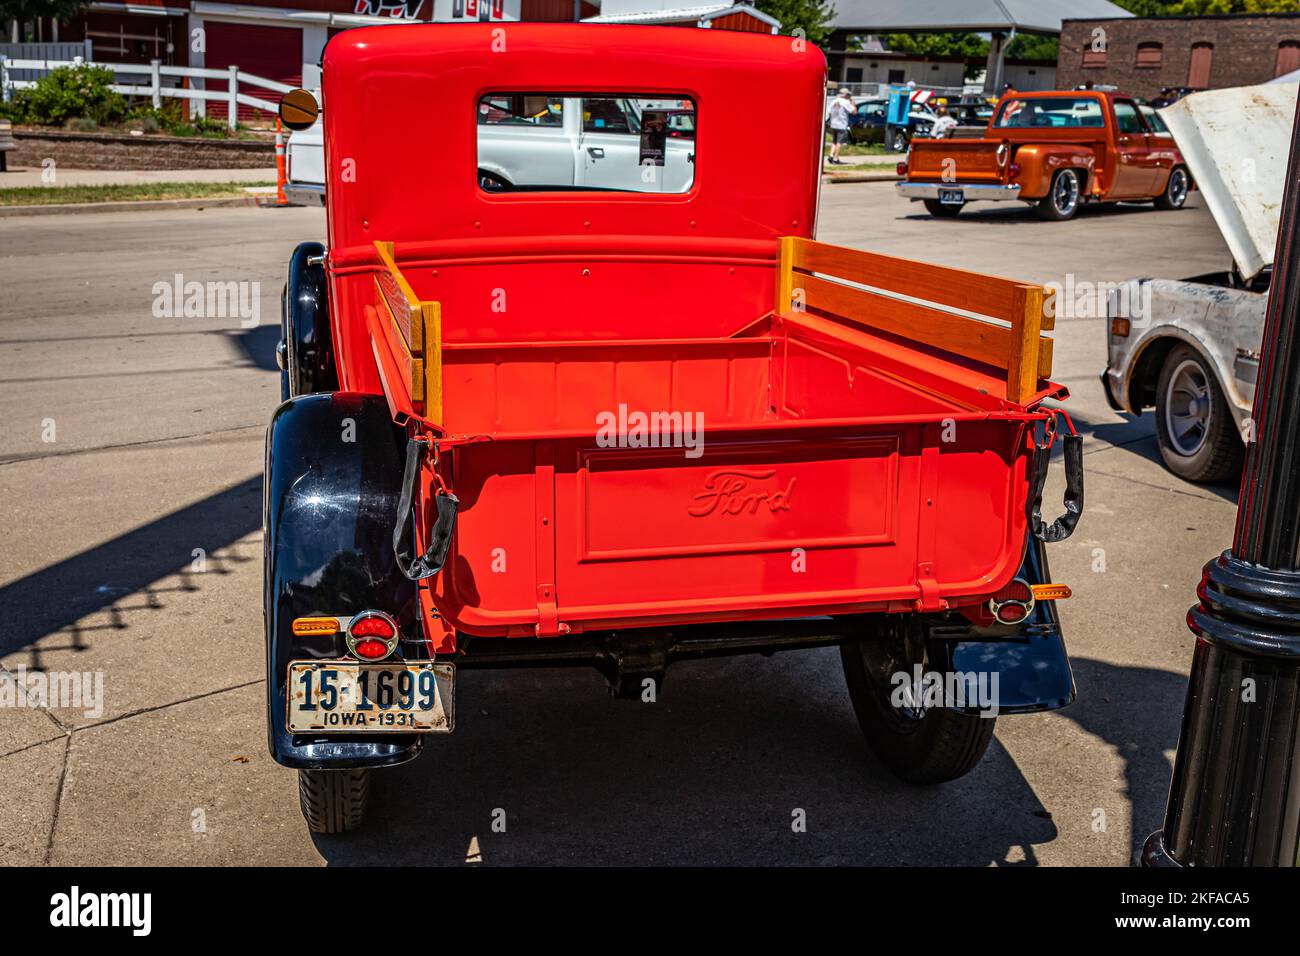 Des Moines, IA - July 02, 2022: High perspective rear view of a 1931 Ford Model A Pickup Truck at a local car show. Stock Photo